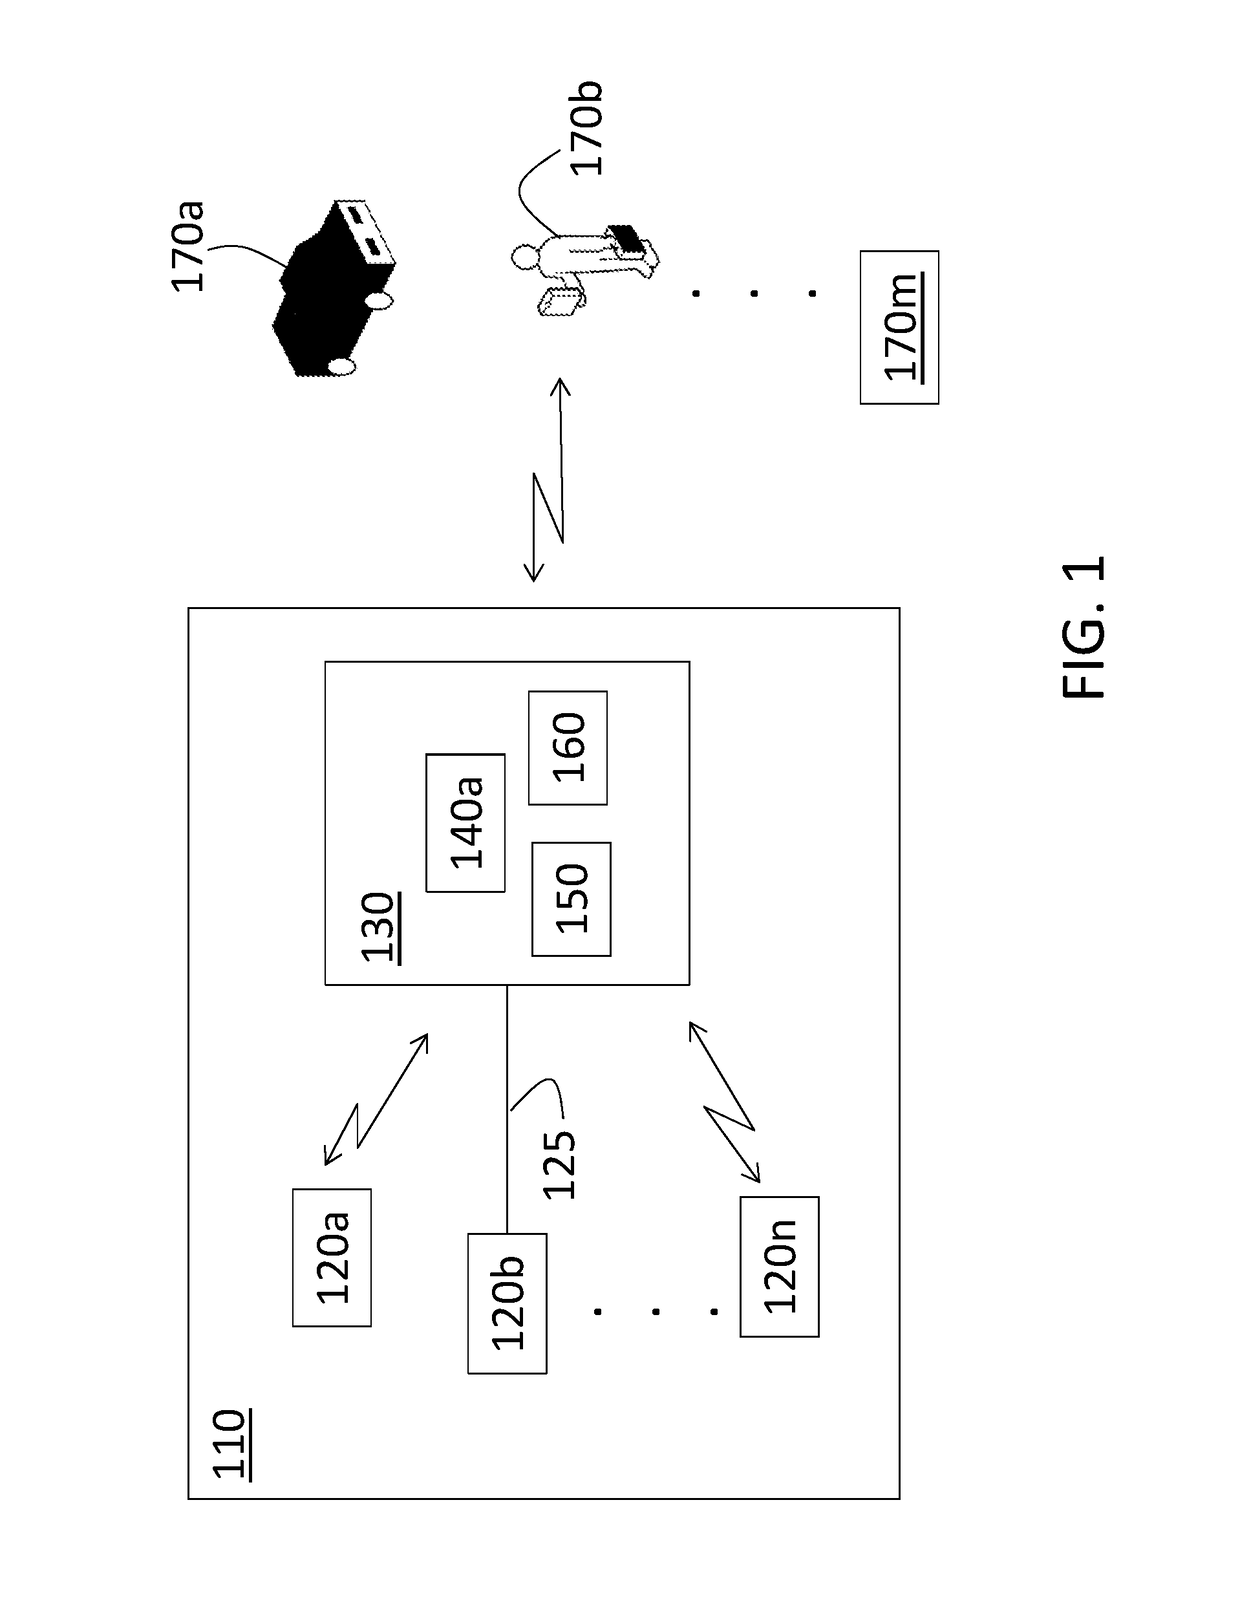 Wireless intra-vehicle communication and information provision by vehicles